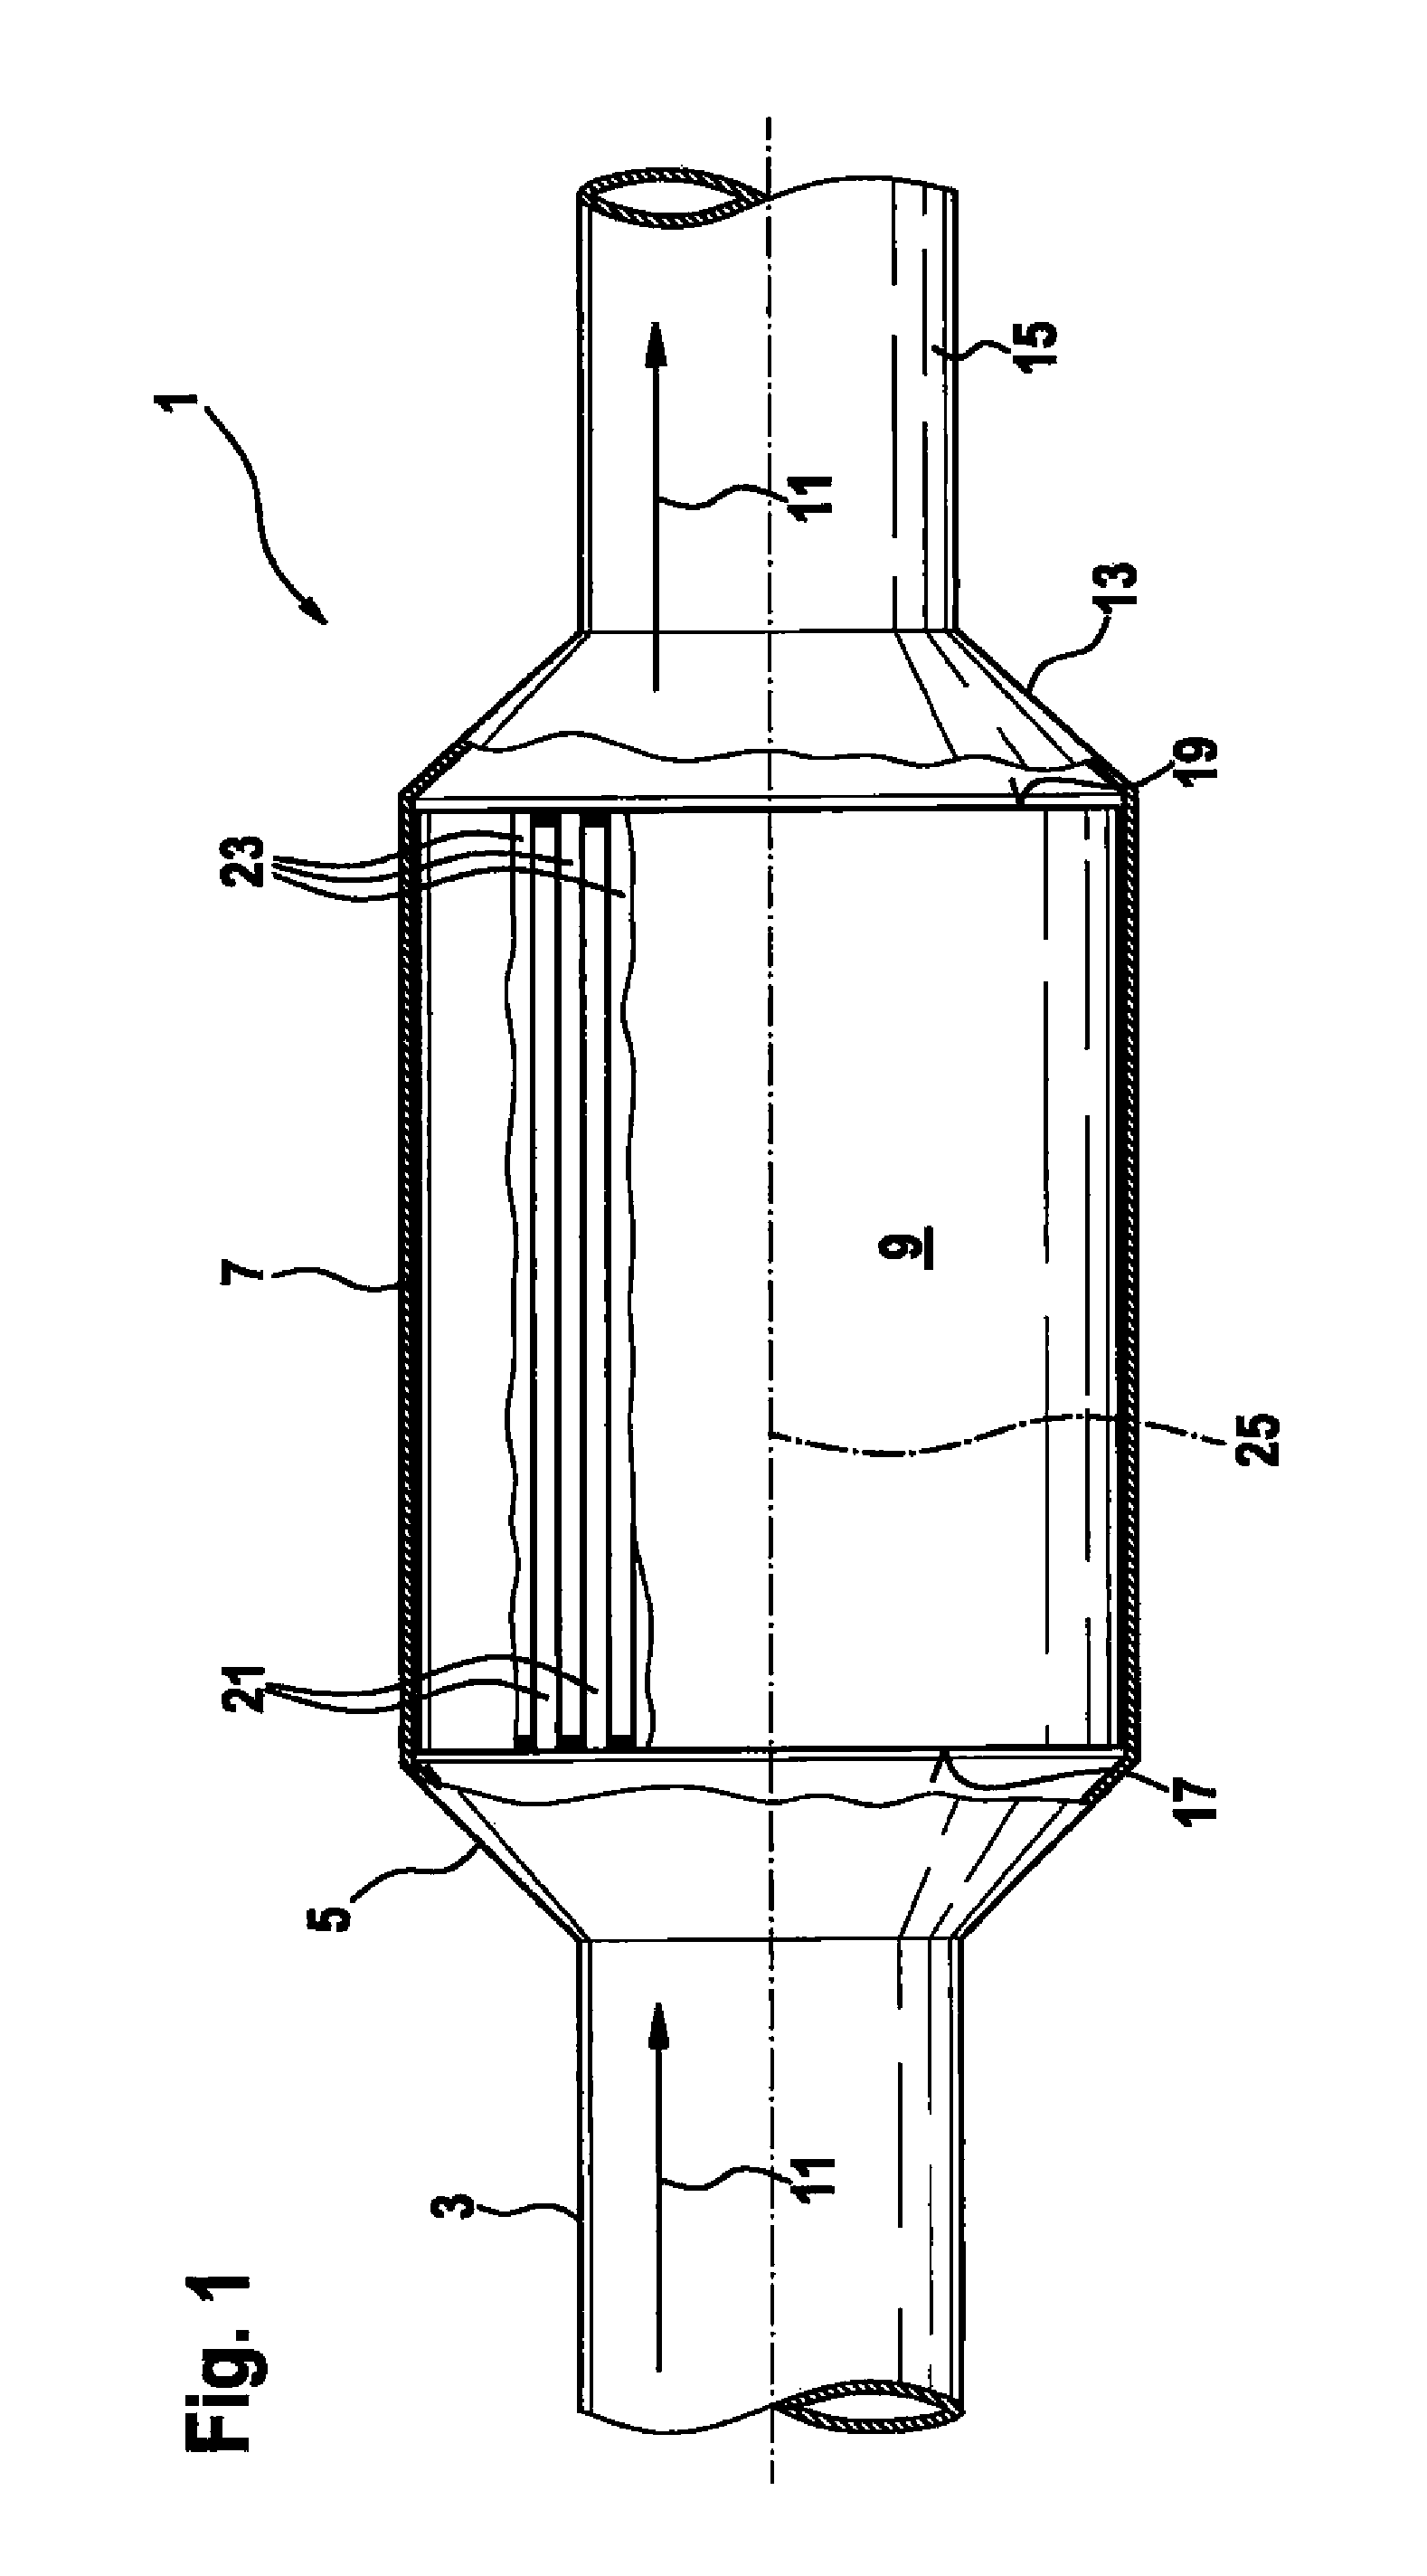 Filter element and soot filter having geometrically similar channels